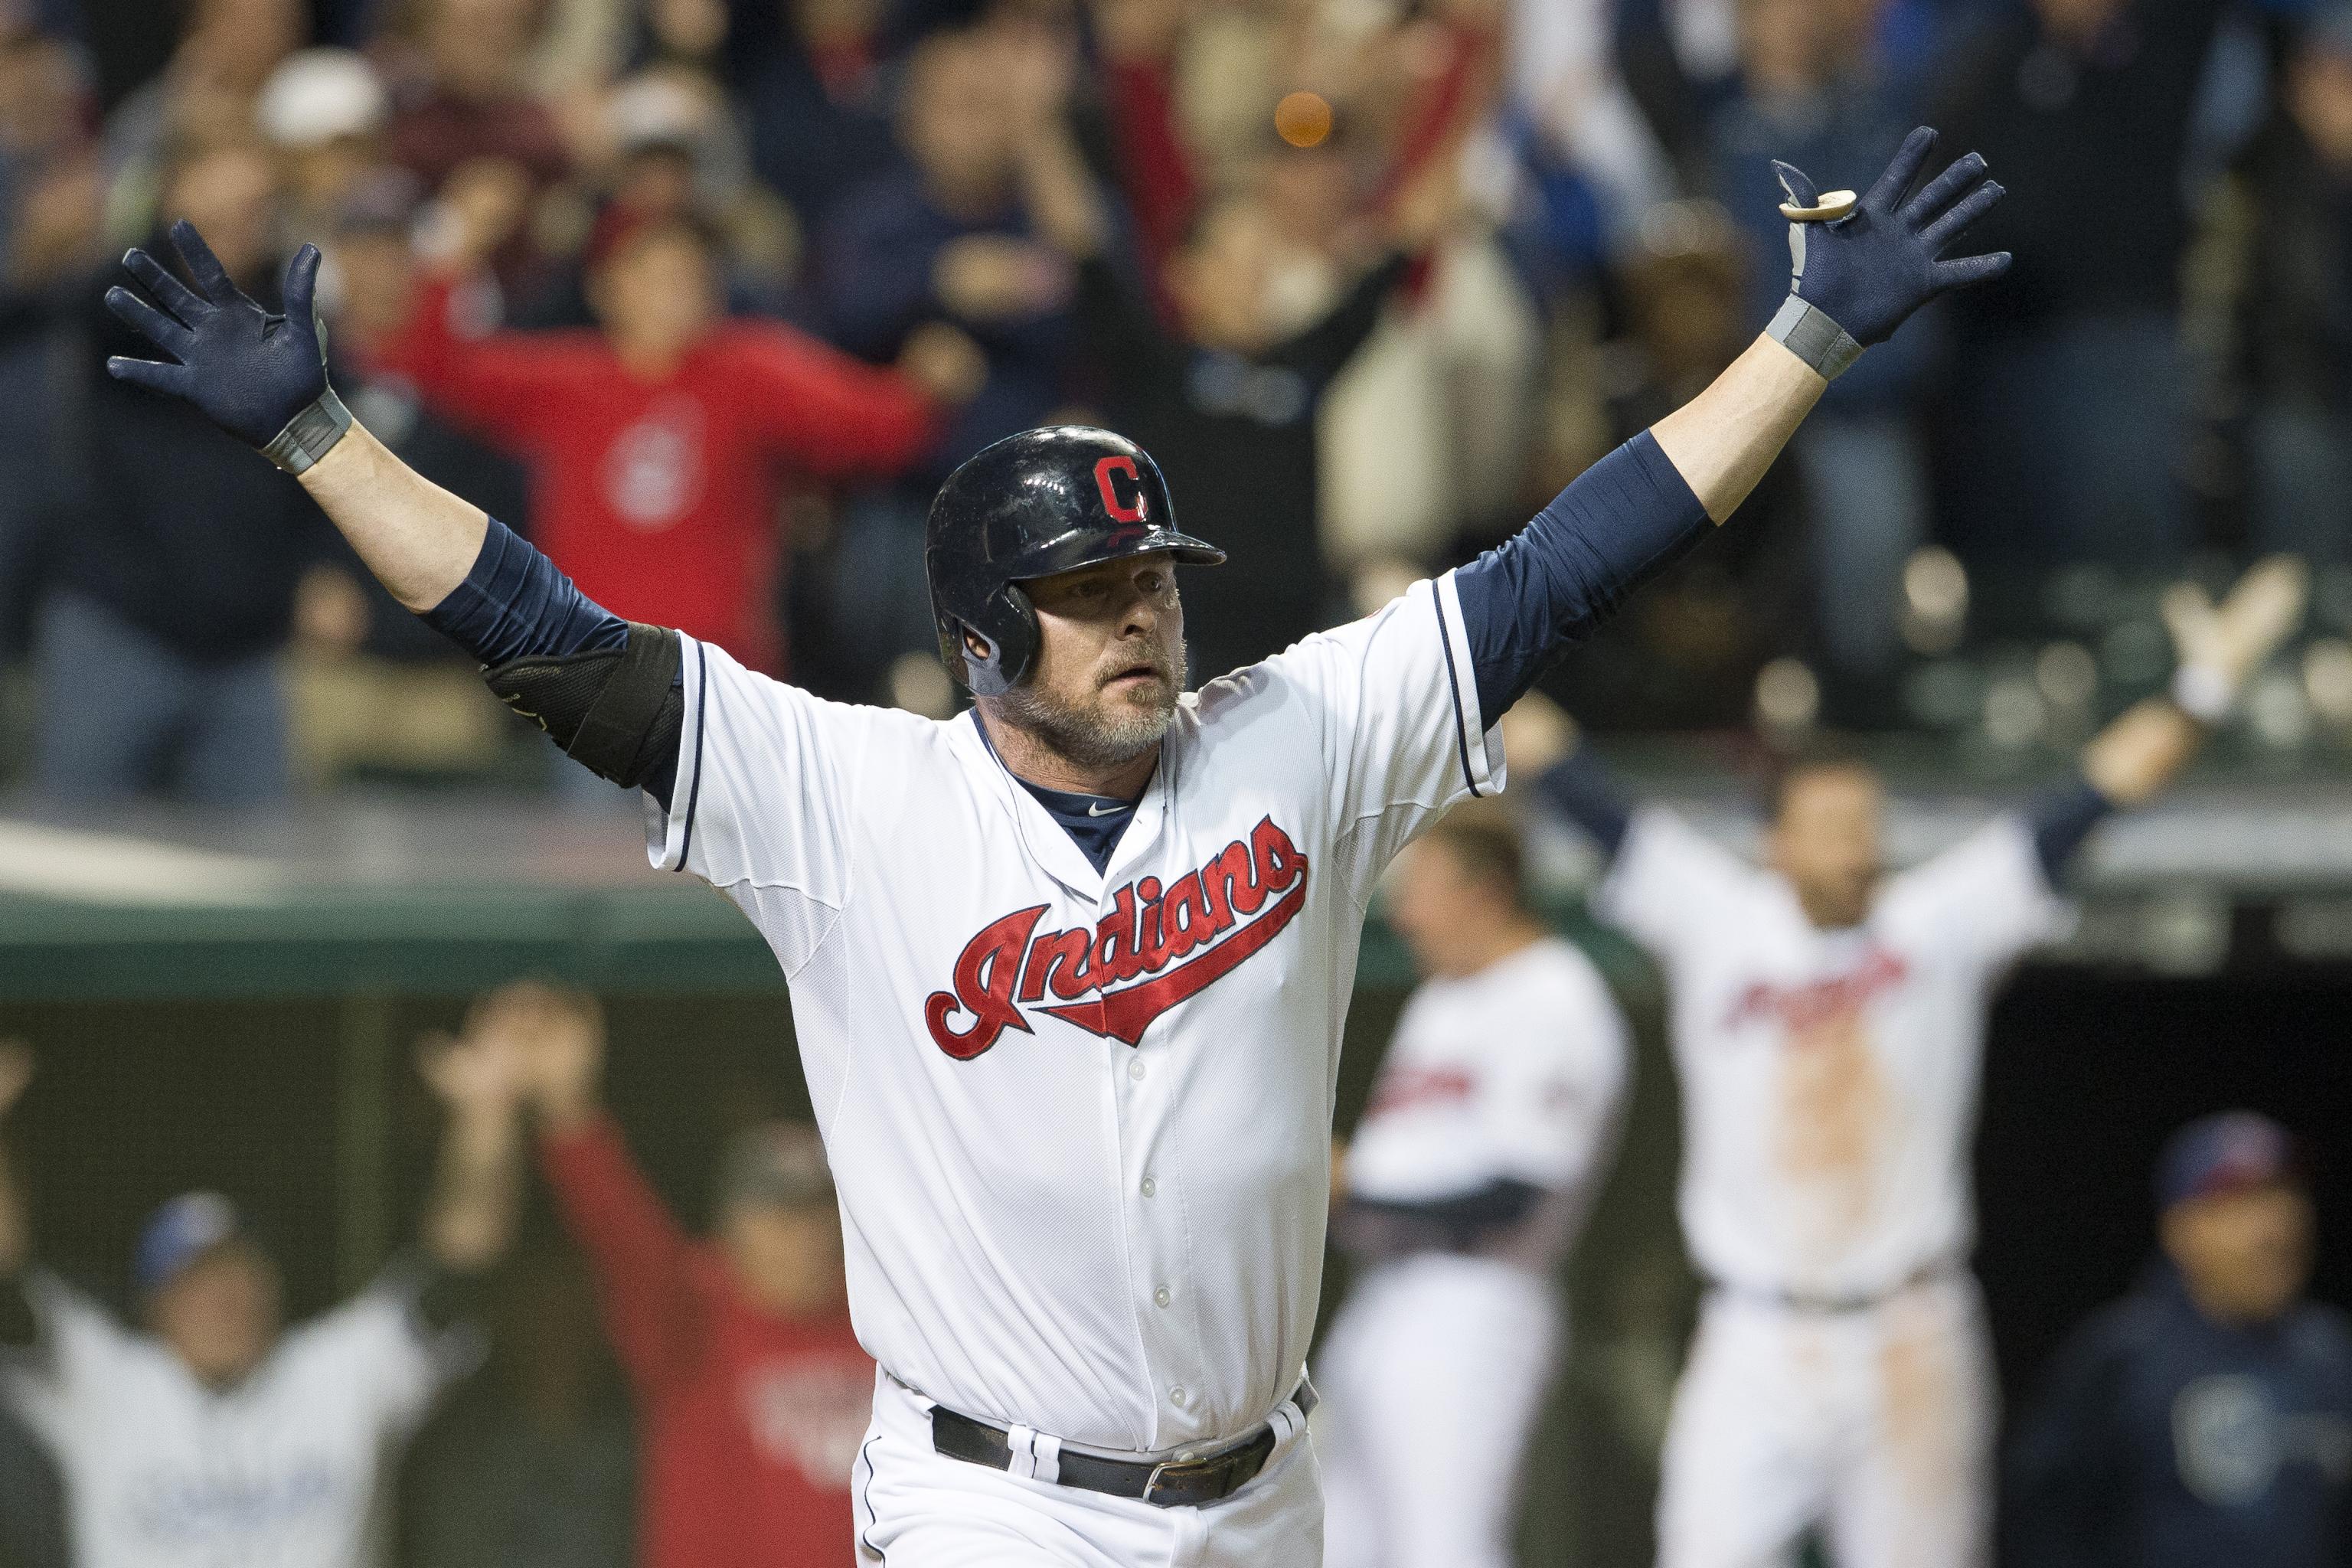 Jason Giambi: MLB Player Retires After 20 Years